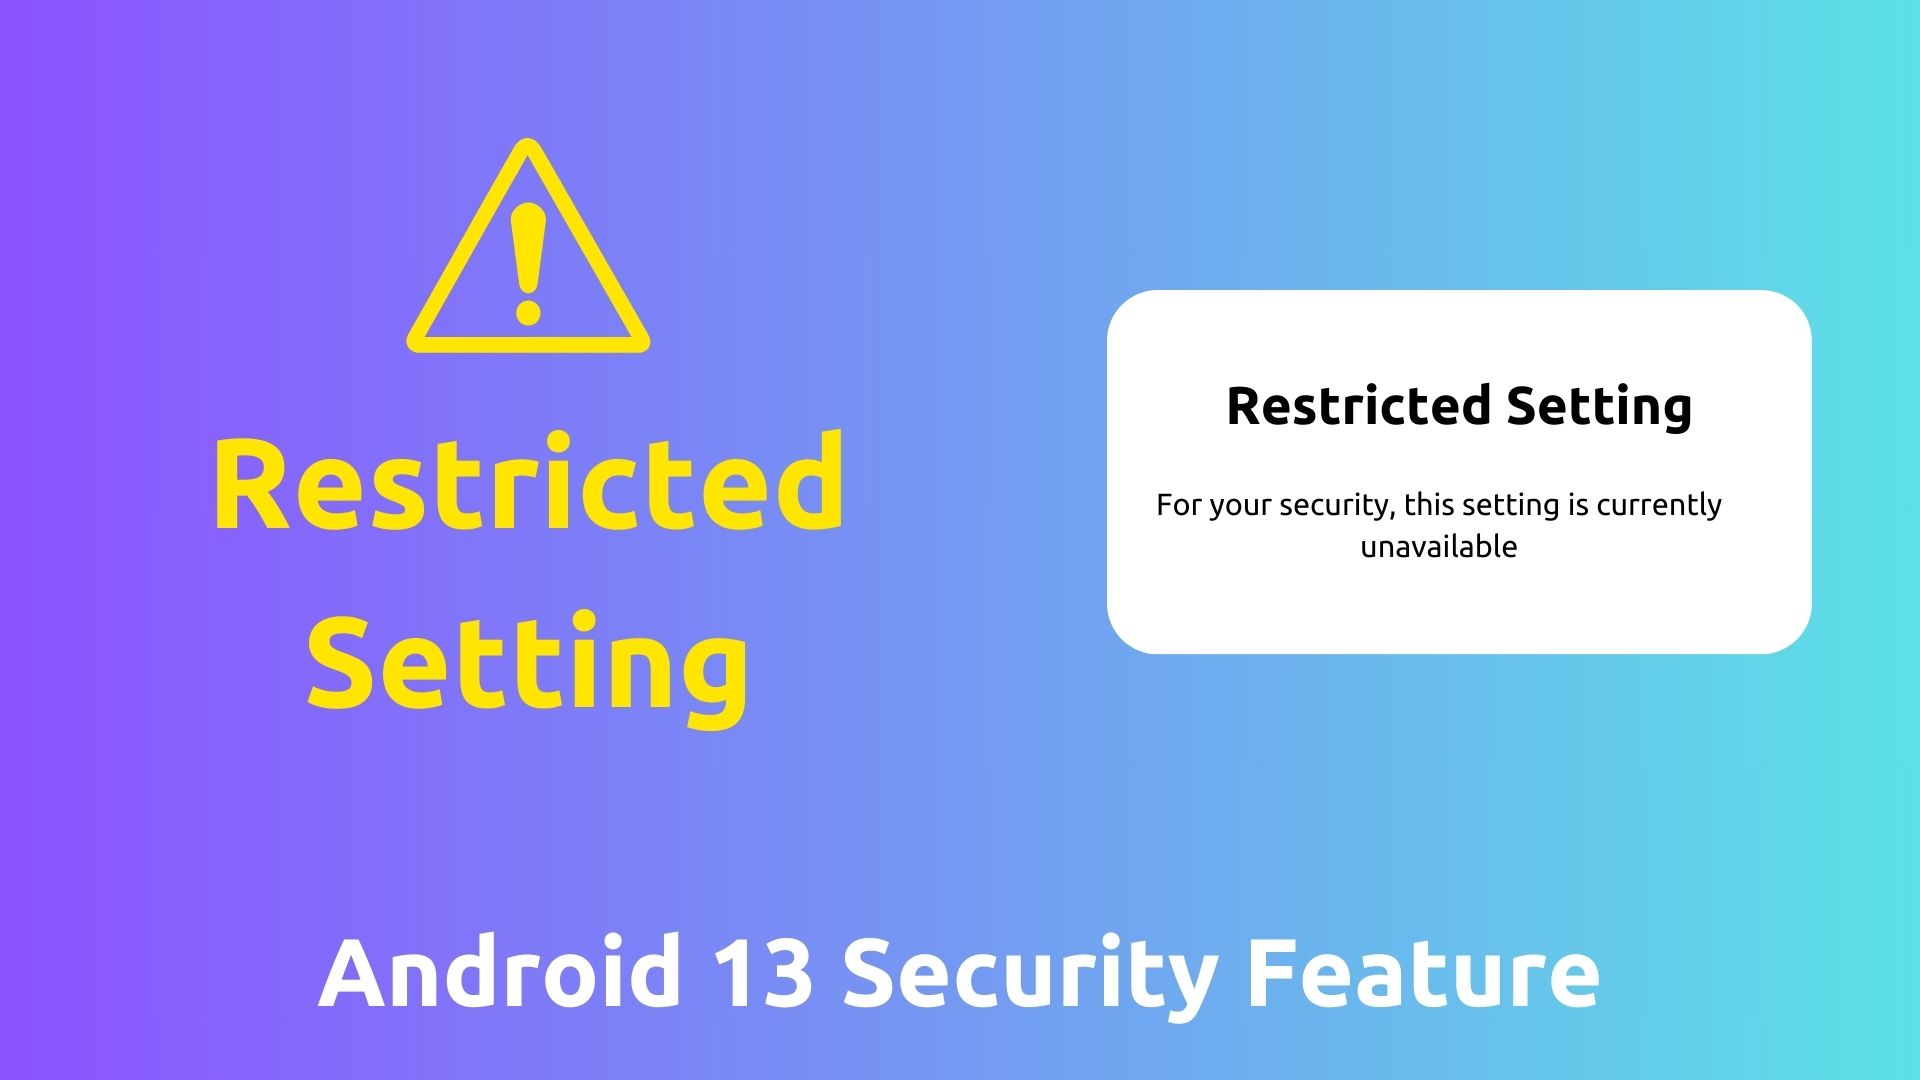 Android 13 Security